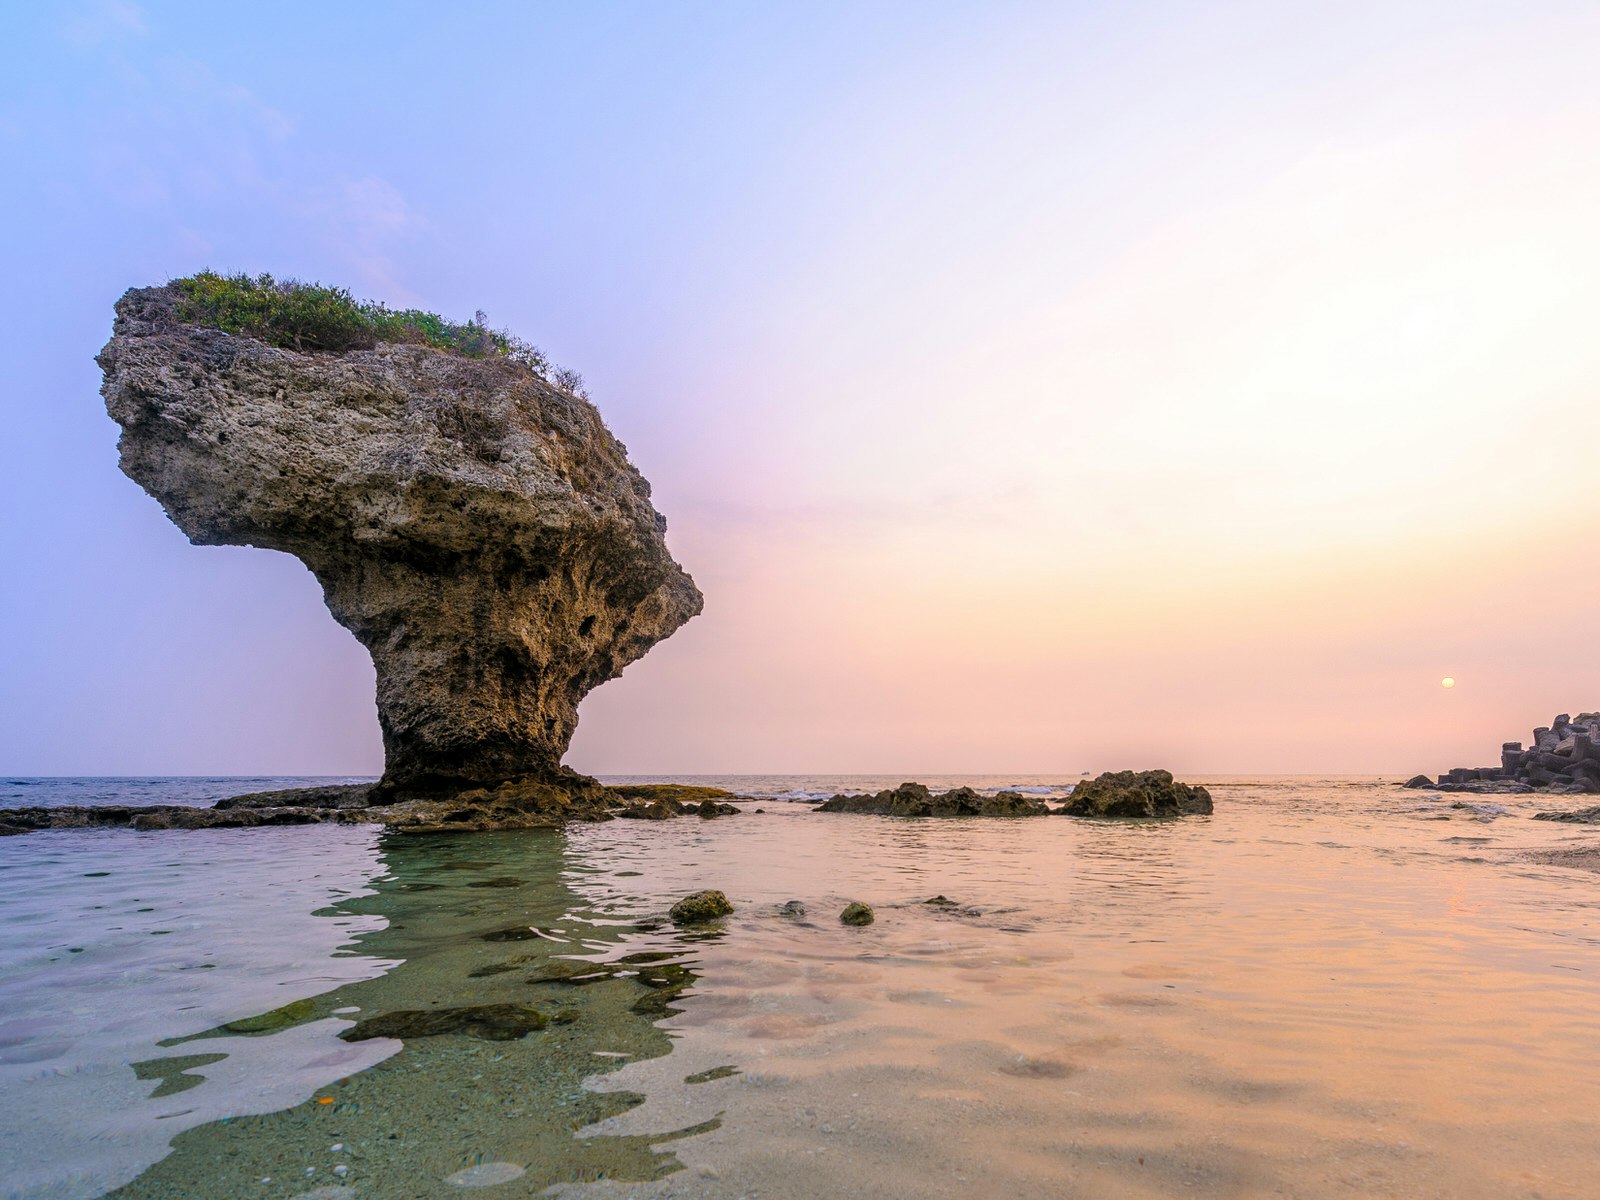 A large coral rock formation rises out of clear sea waters with pink and purple sunset and moon behind. Vase Rock is Little Liuchiu Island's star landmark © Richie Chan / Shutterstock